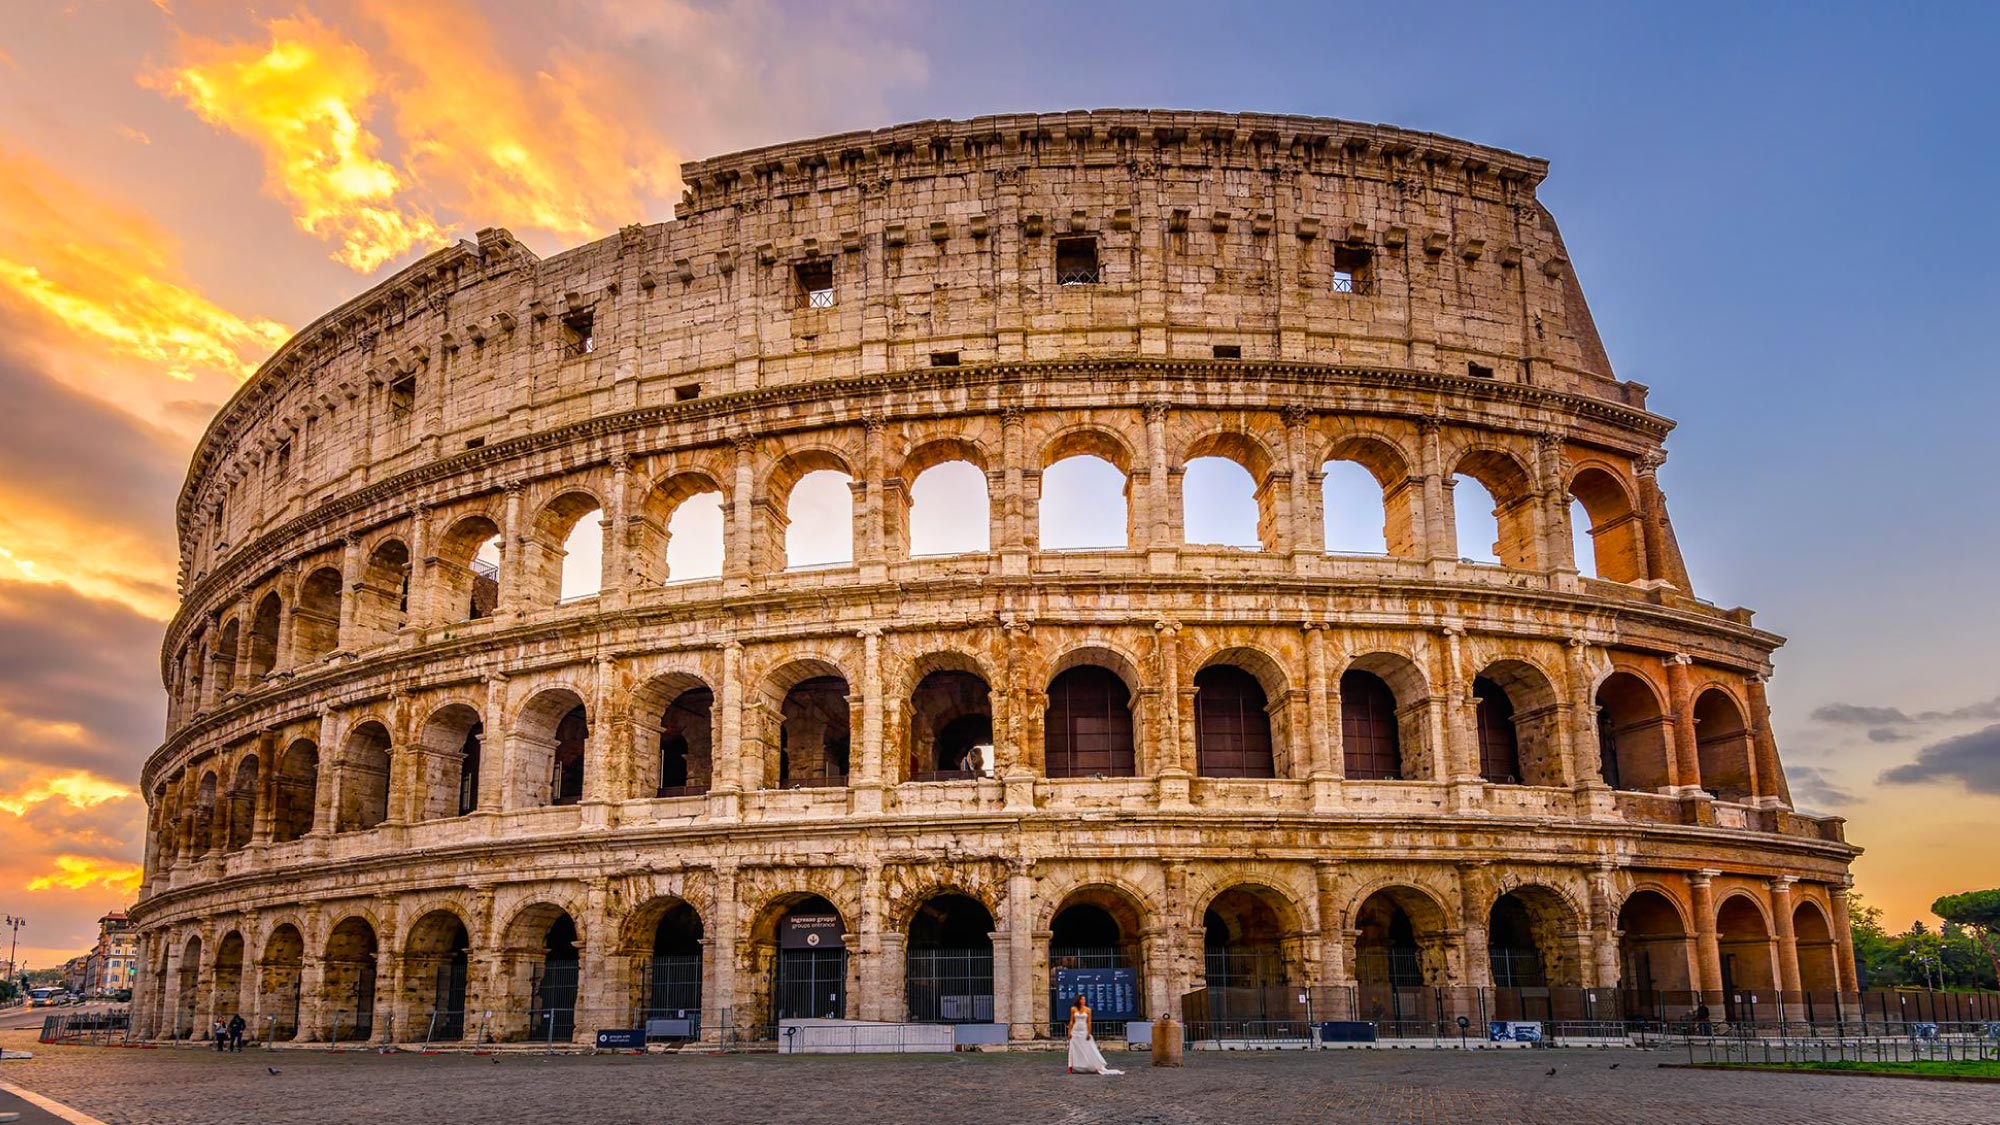 Stunning sunset over the Coliseum in Rome.